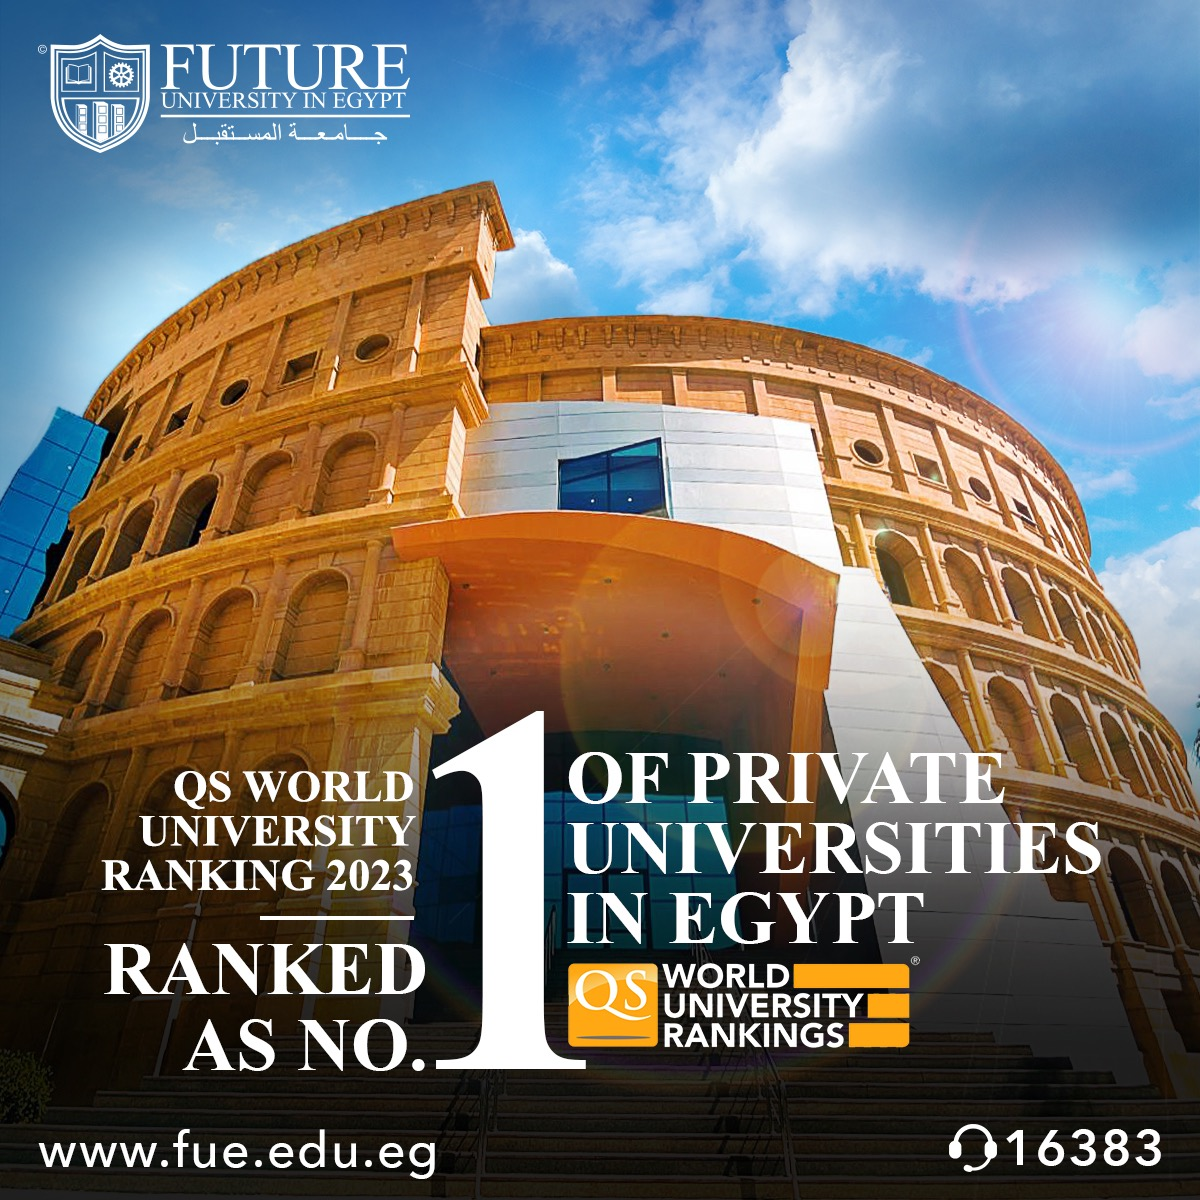 Future University in Egypt (FUE) is the top private university according to QS World University Rankings